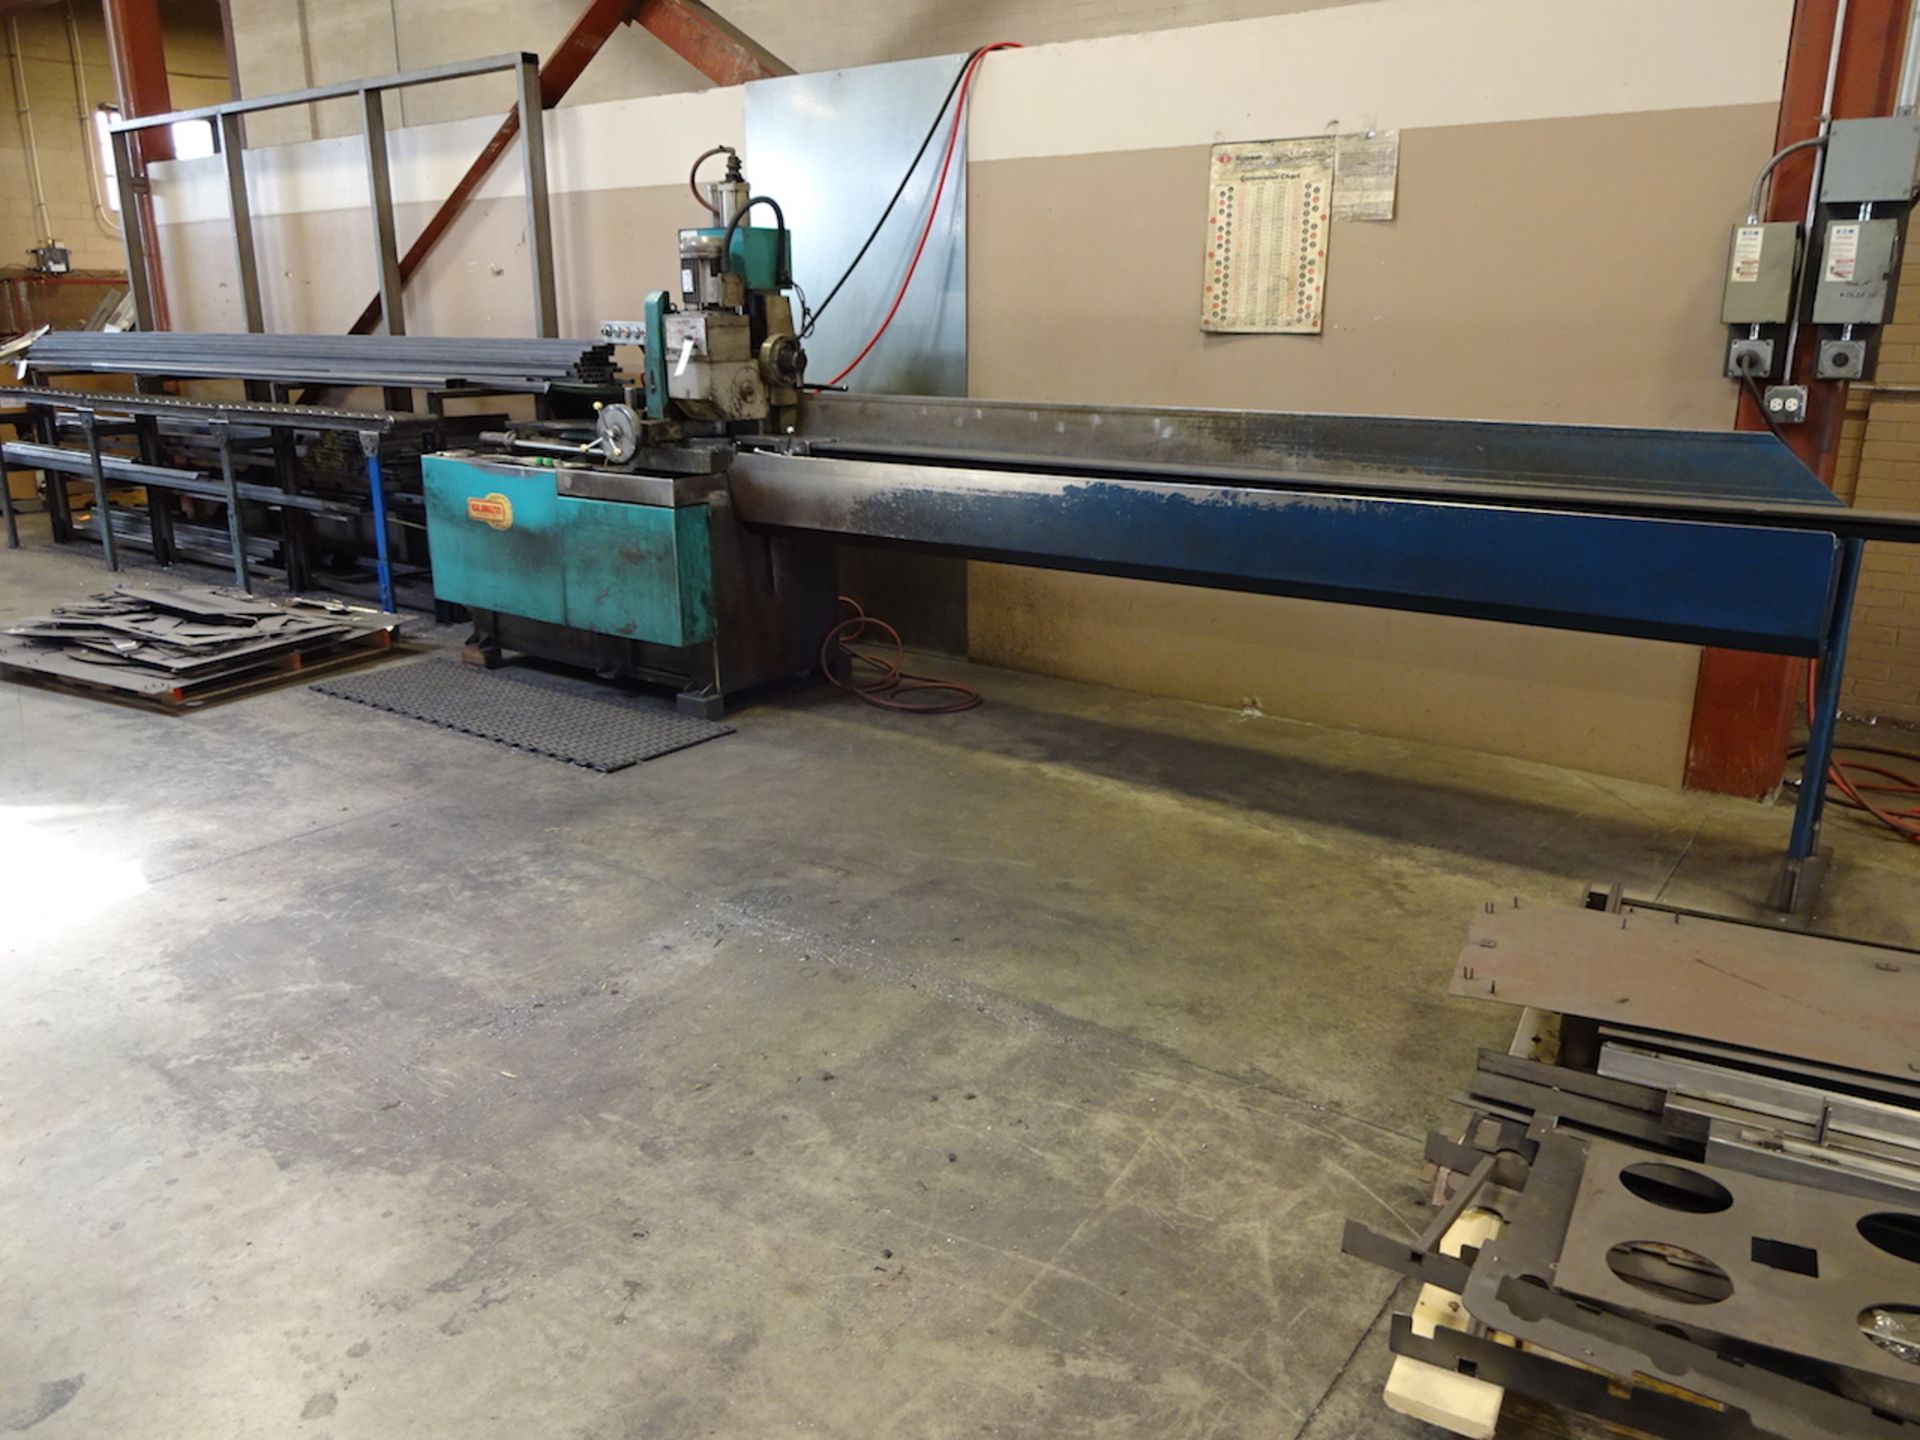 1997 Kalamazoo Model C350A Automatic Cold Saw, S/N 97003, 12 in. Roller Infeed Conveyor, 12 in.